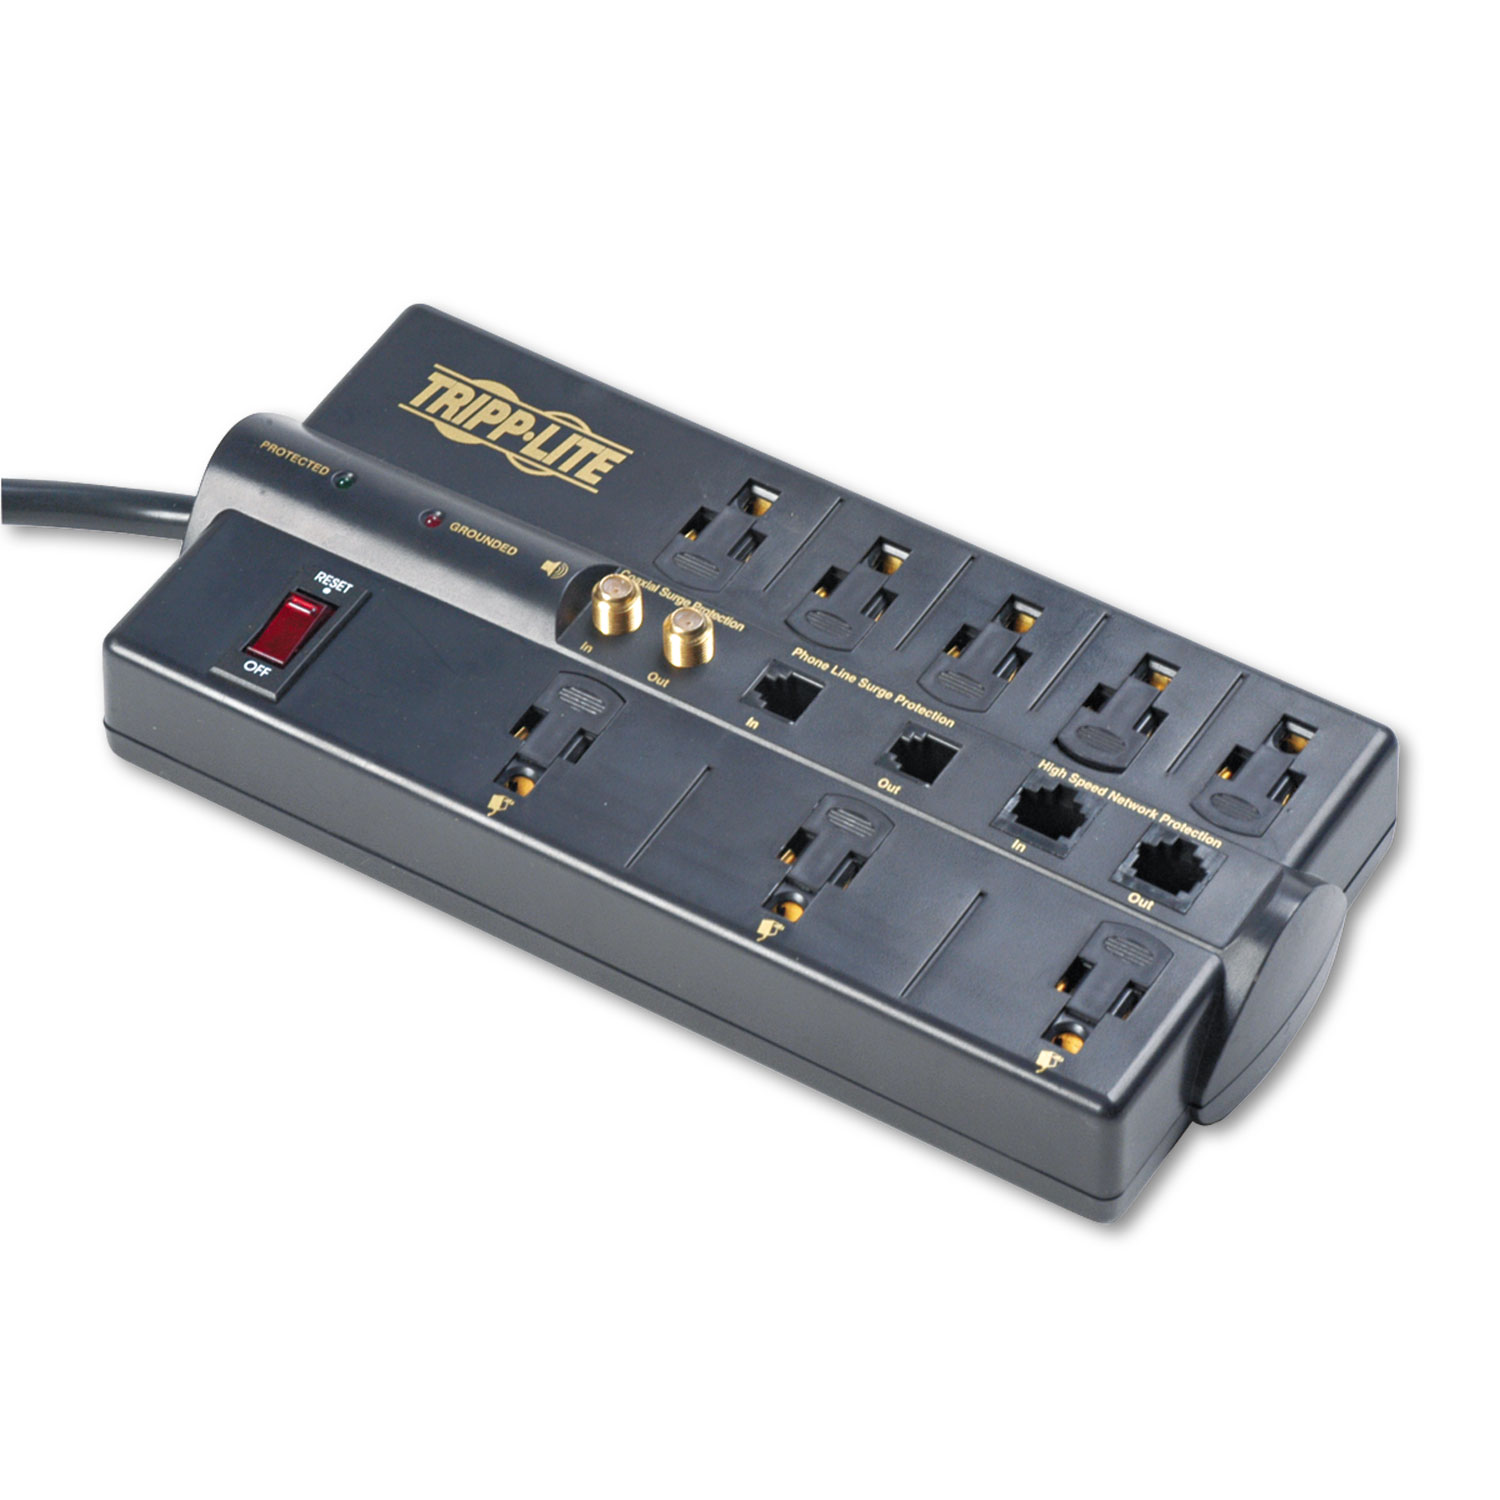 Protect It! Surge Protector, 8 Outlets, 10 ft. Cord, 3240 Joules, RJ45, Black